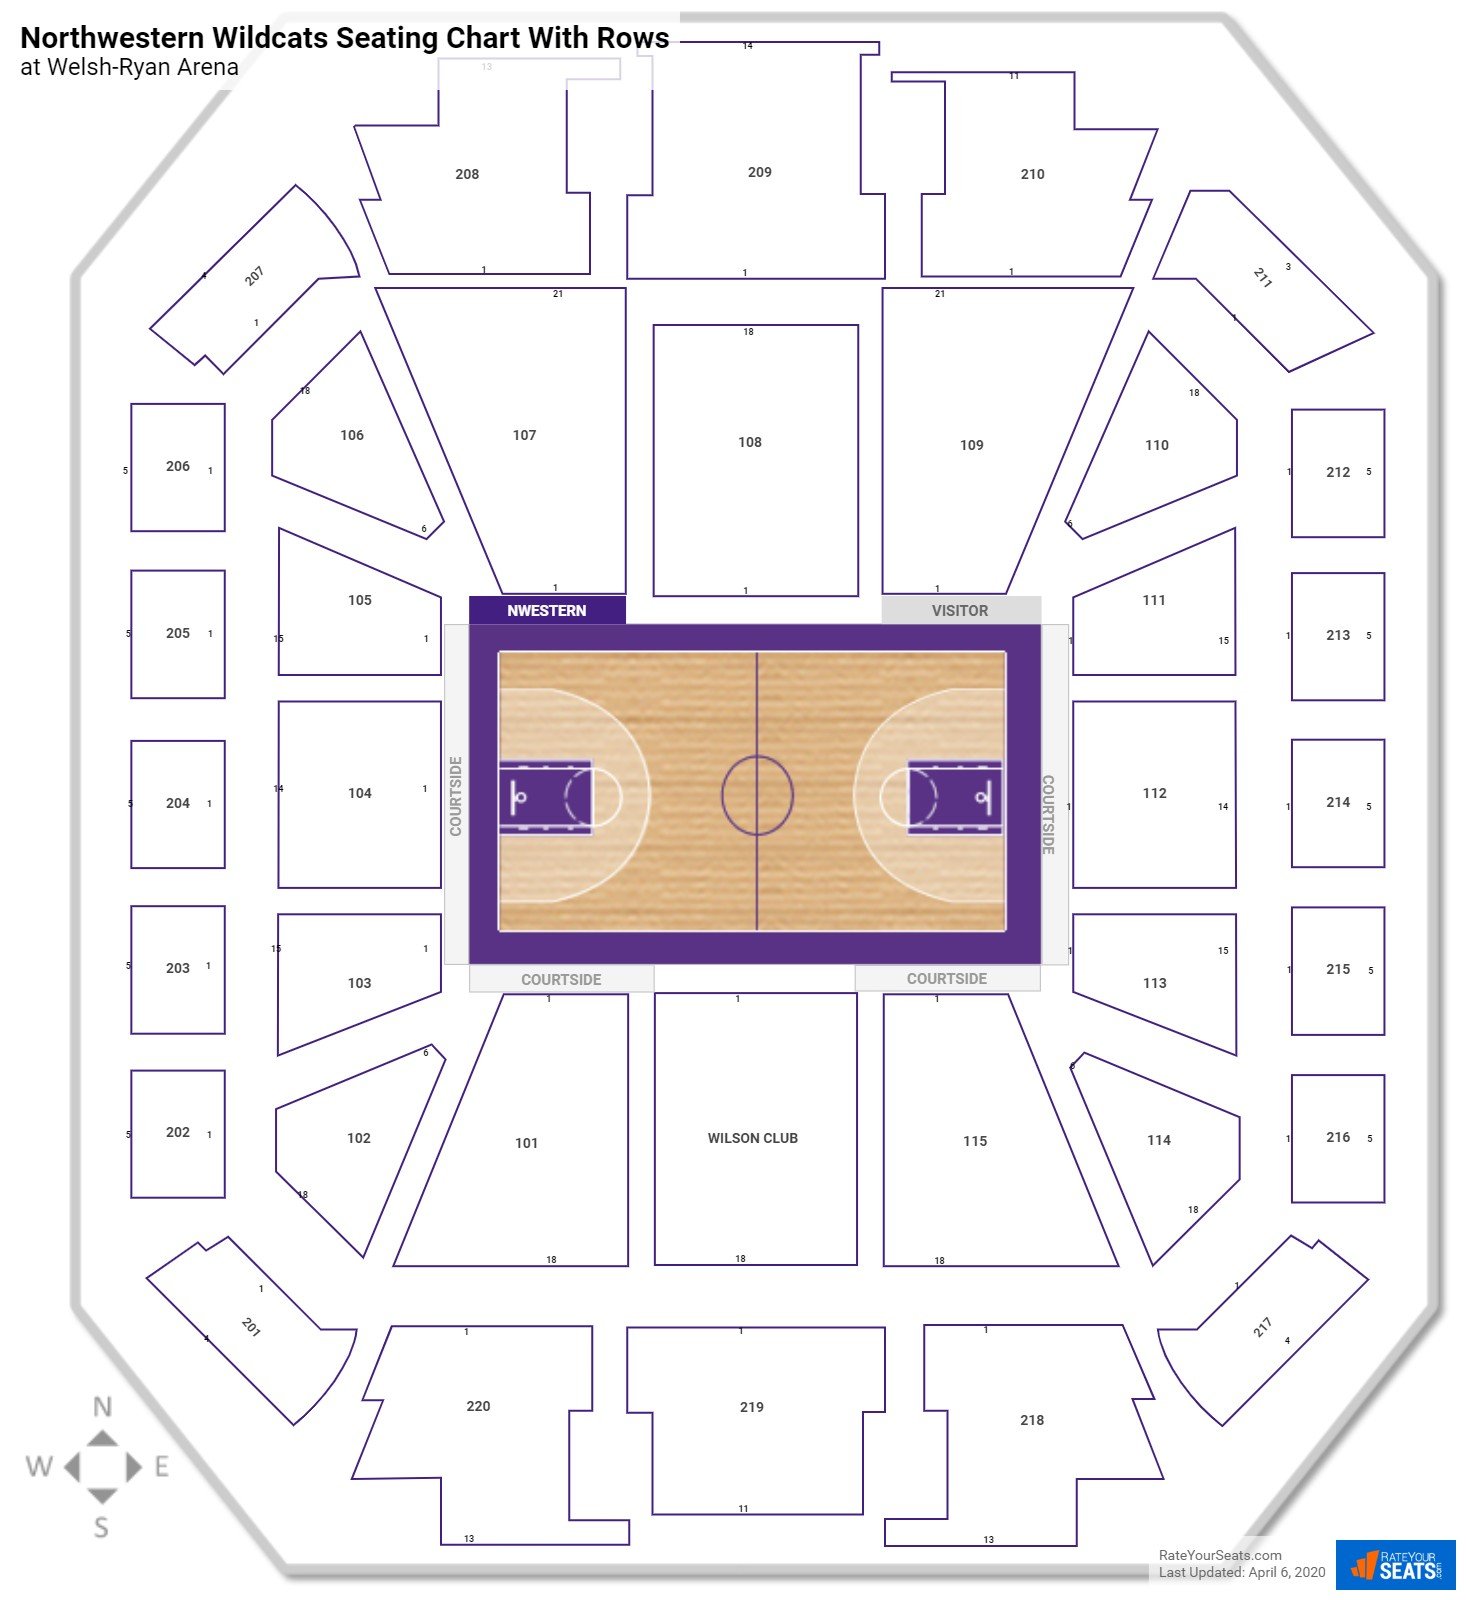 Welsh-Ryan Arena seating chart with row numbers